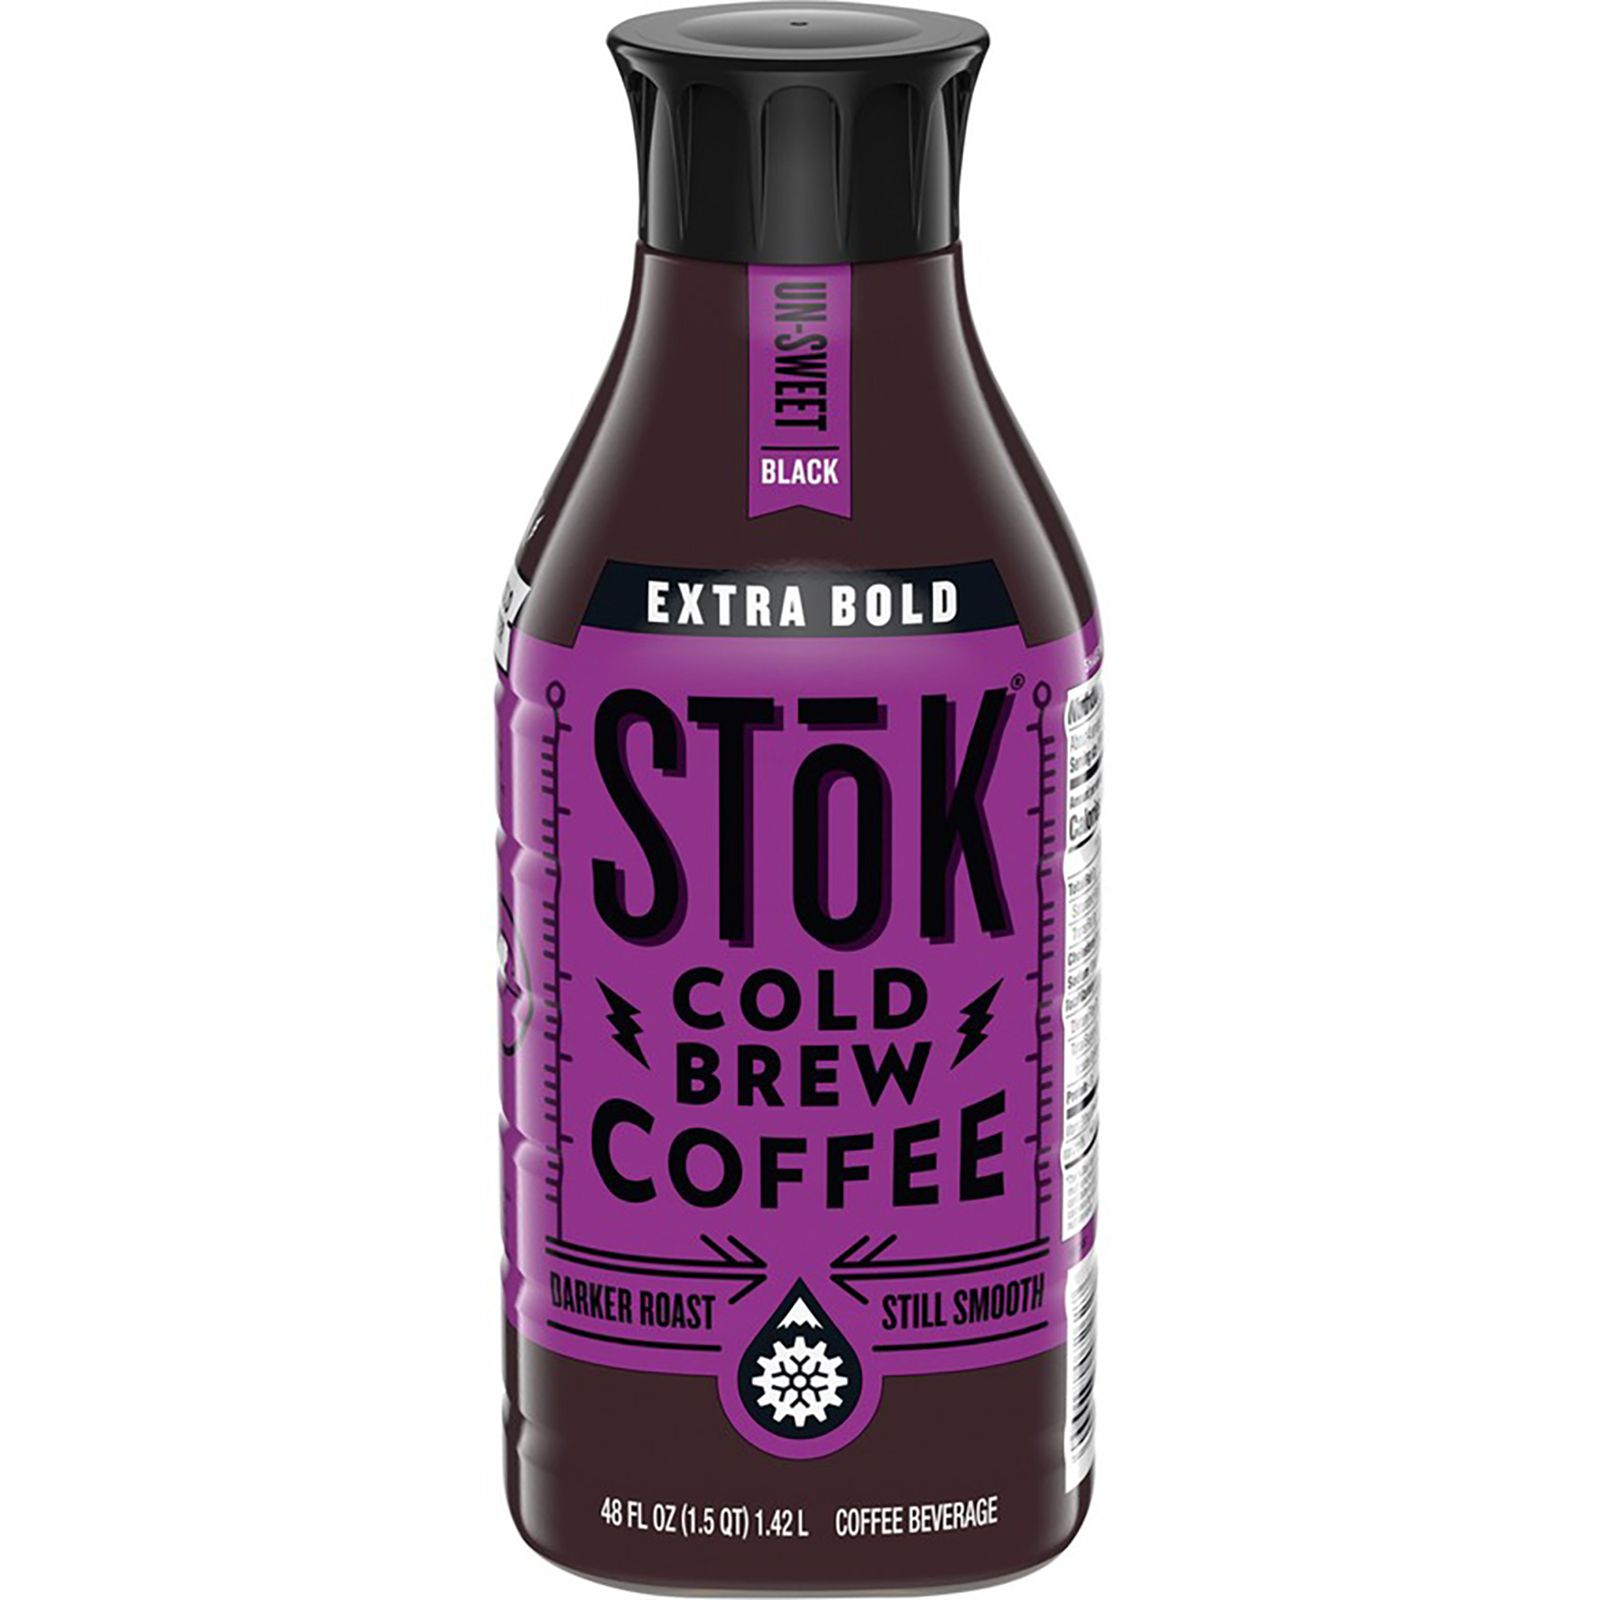  SToK Cold Brew Coffee 48oz. Bottles (2 pack) (Unsweetened)